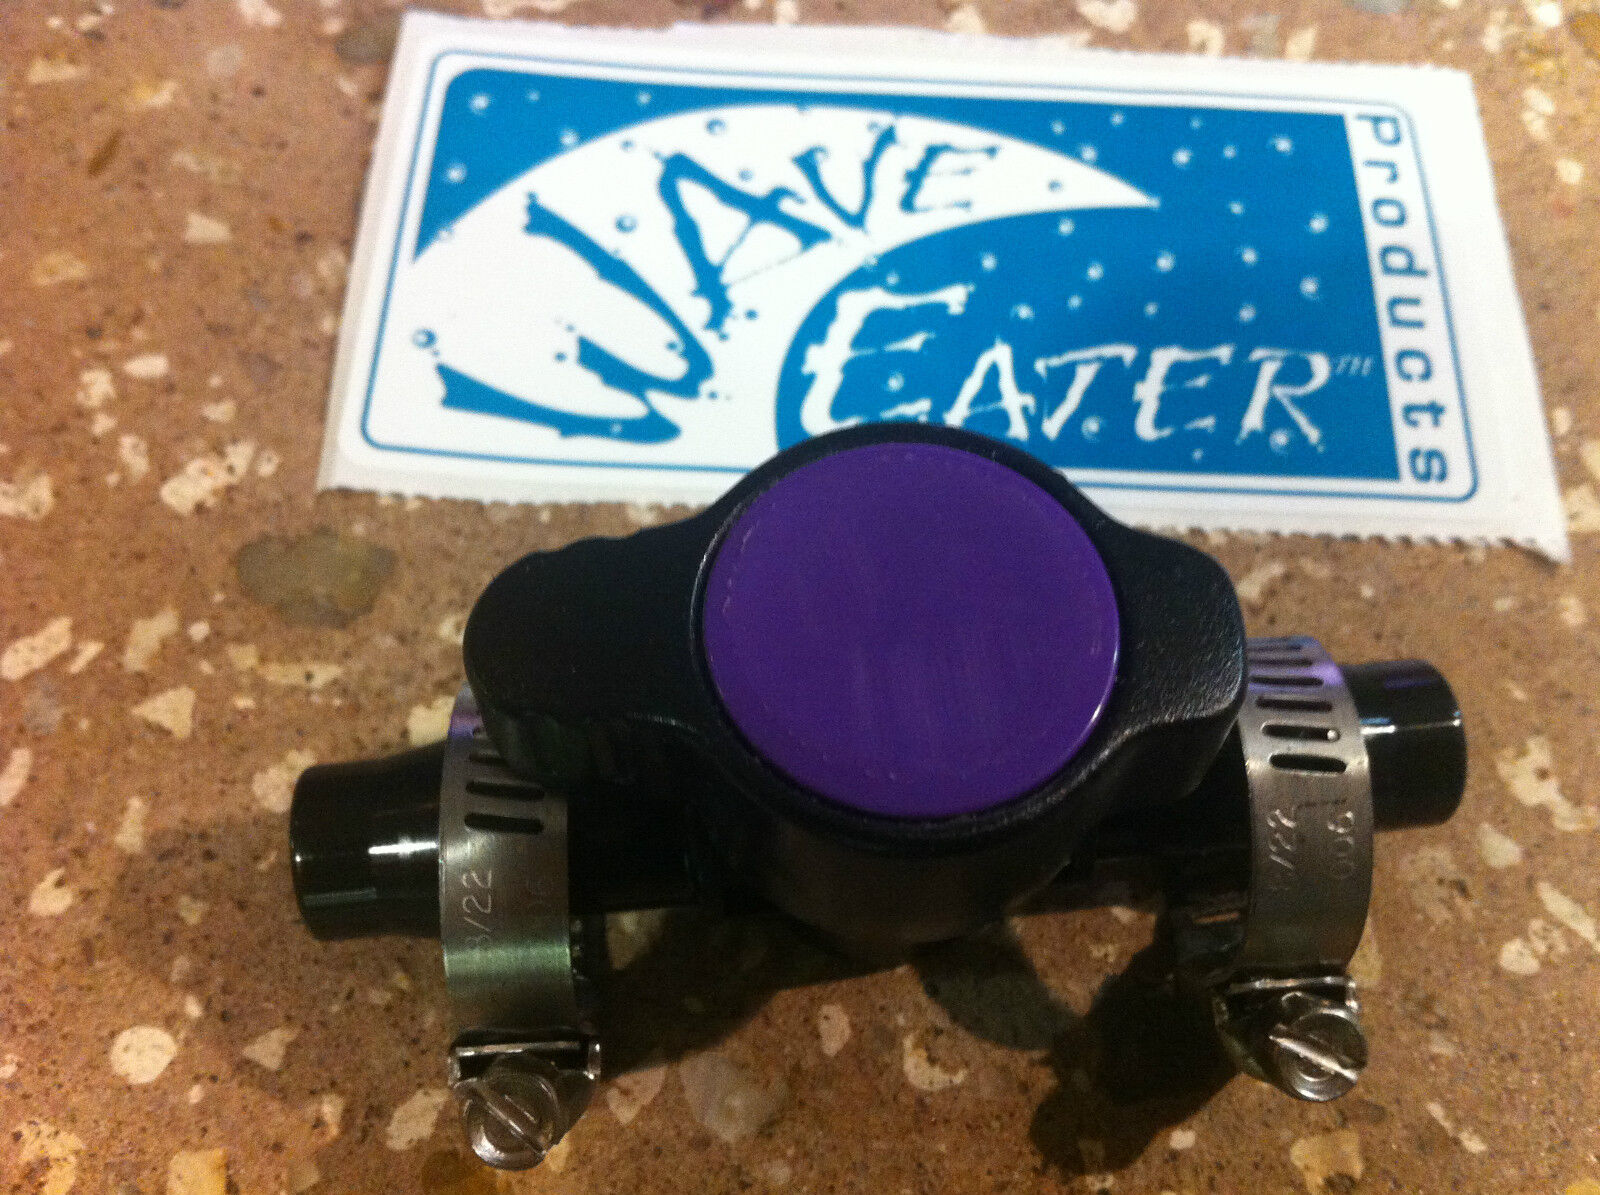 Yamaha Seadoo 2 stroke  jetski Towing Valve. for all brands of PWC Wave runners